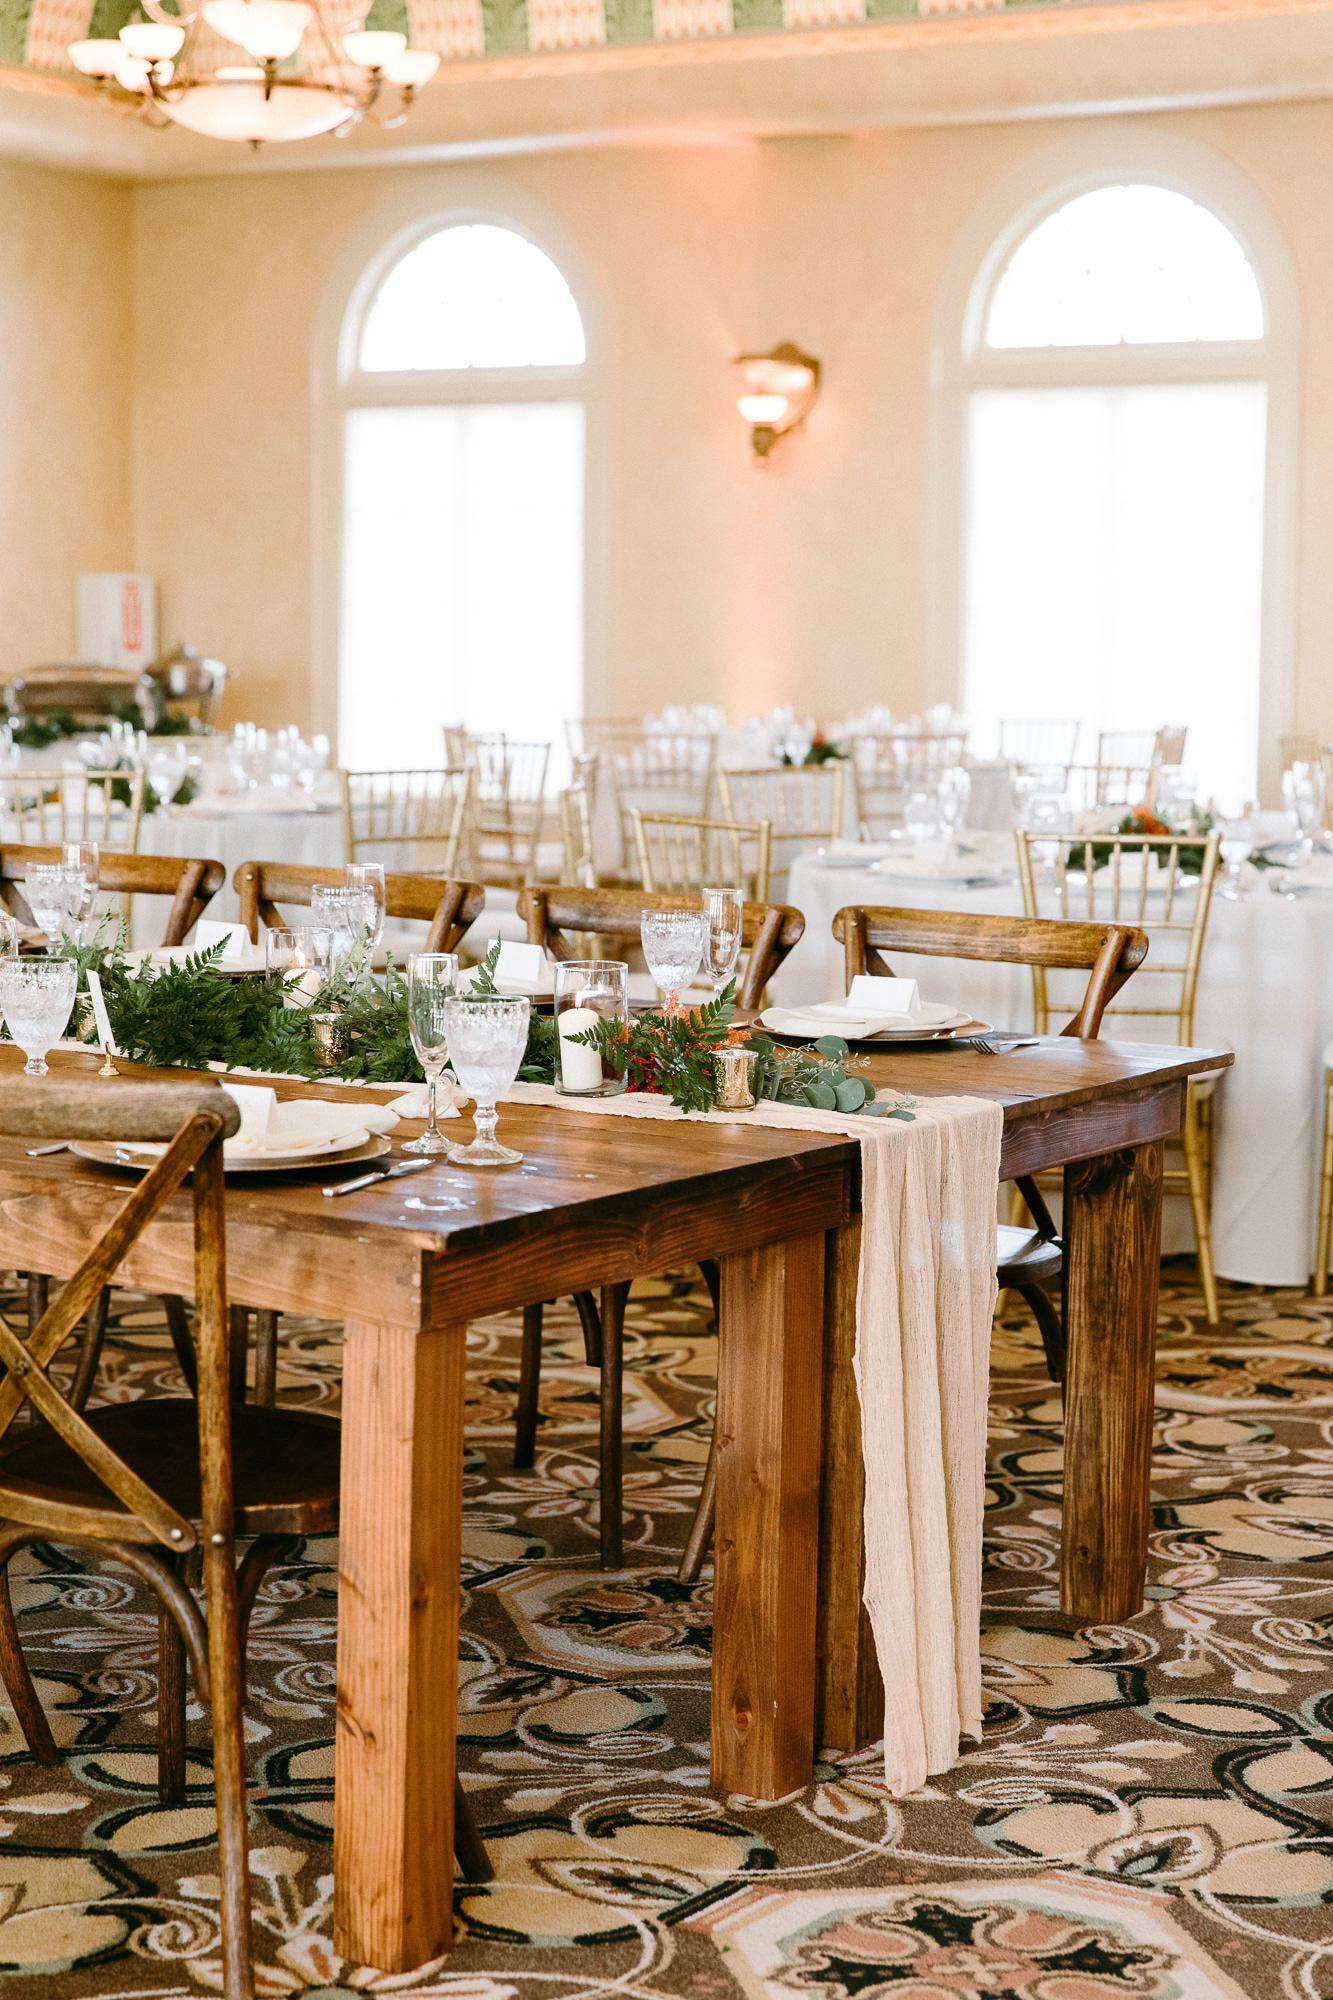 Rustic Italian Elegant Wedding Reception Decor, Long Wooden Feasting Table with Wooden Cross Back Chairs, Ivory Cheesecloth Table Runner with Greenery, Candlesticks | Tampa Bay Wedding Rentals Outside the Box Rentals